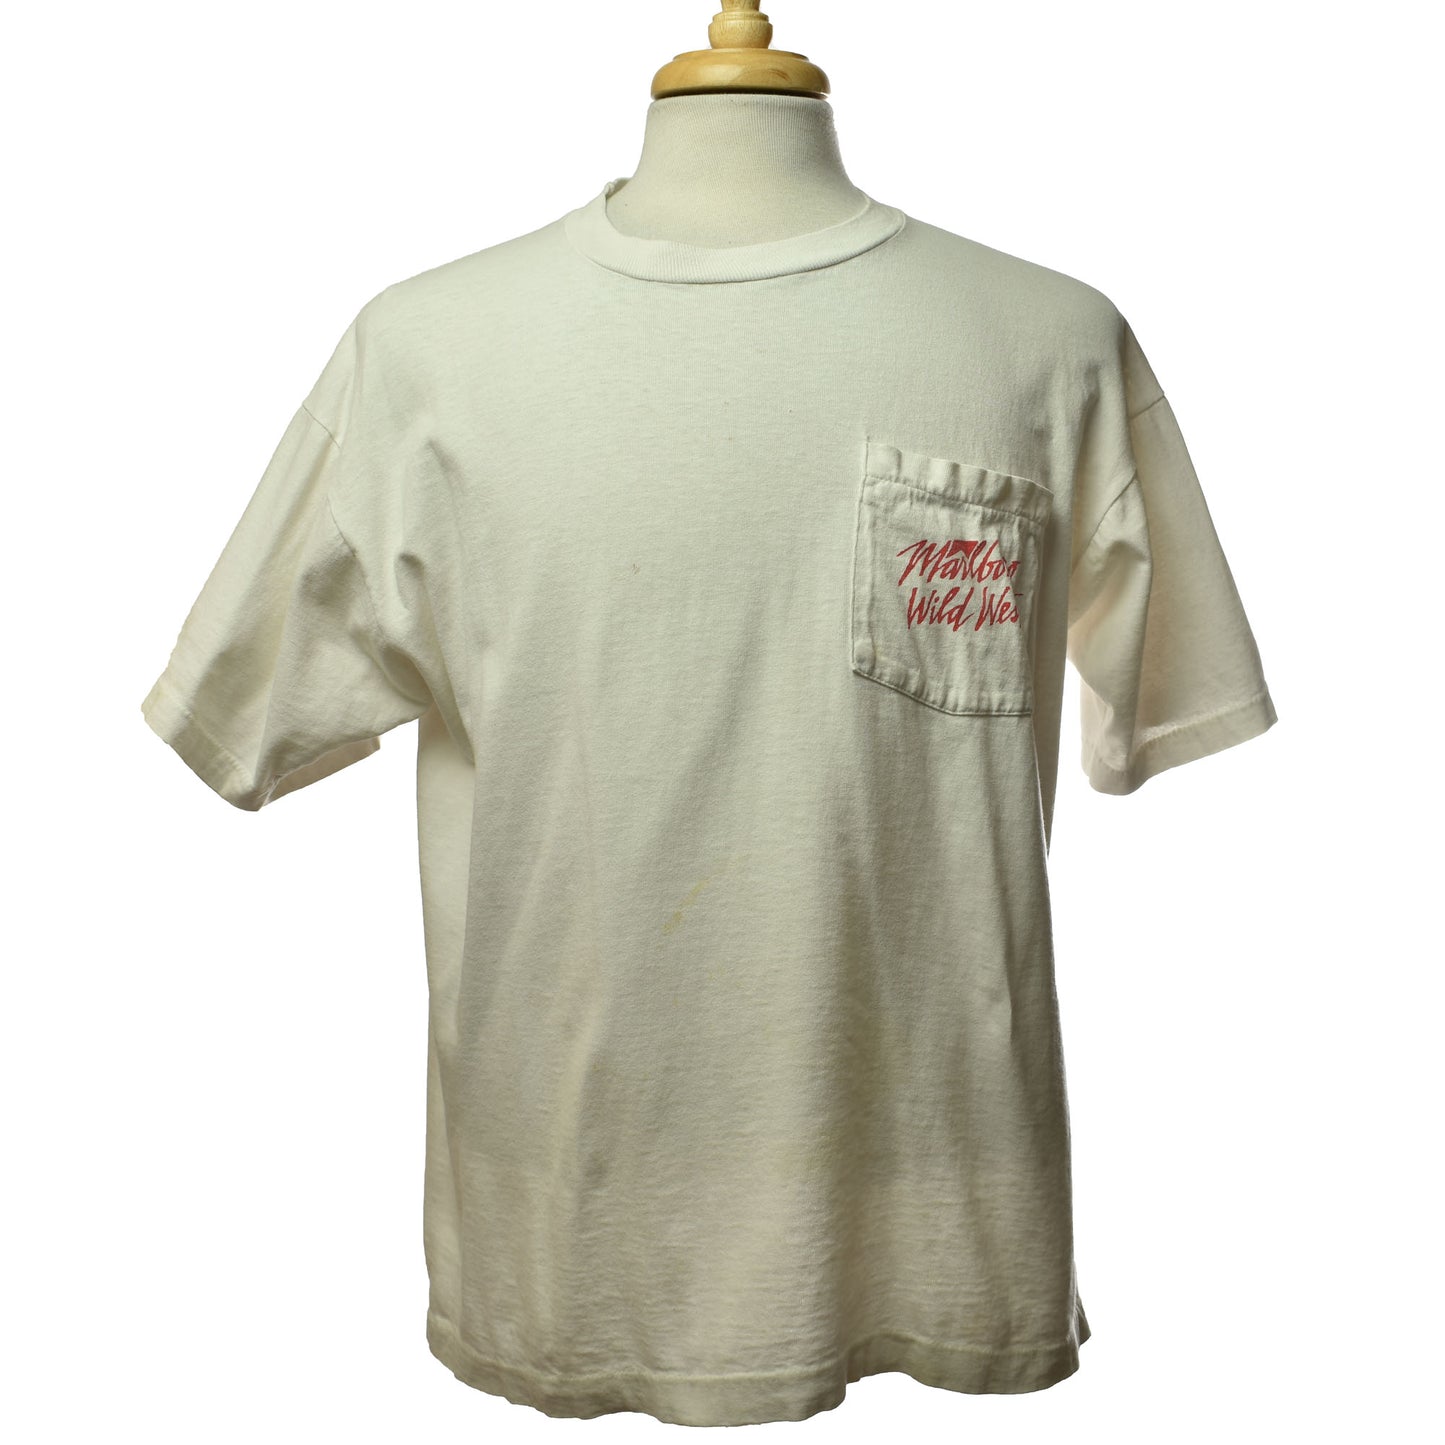 Vintage 90's Single Stitch Marlboro Wild West Collection Fruit of the Loom Tee 100% Cotton Made in USA 11202256 - Size XL